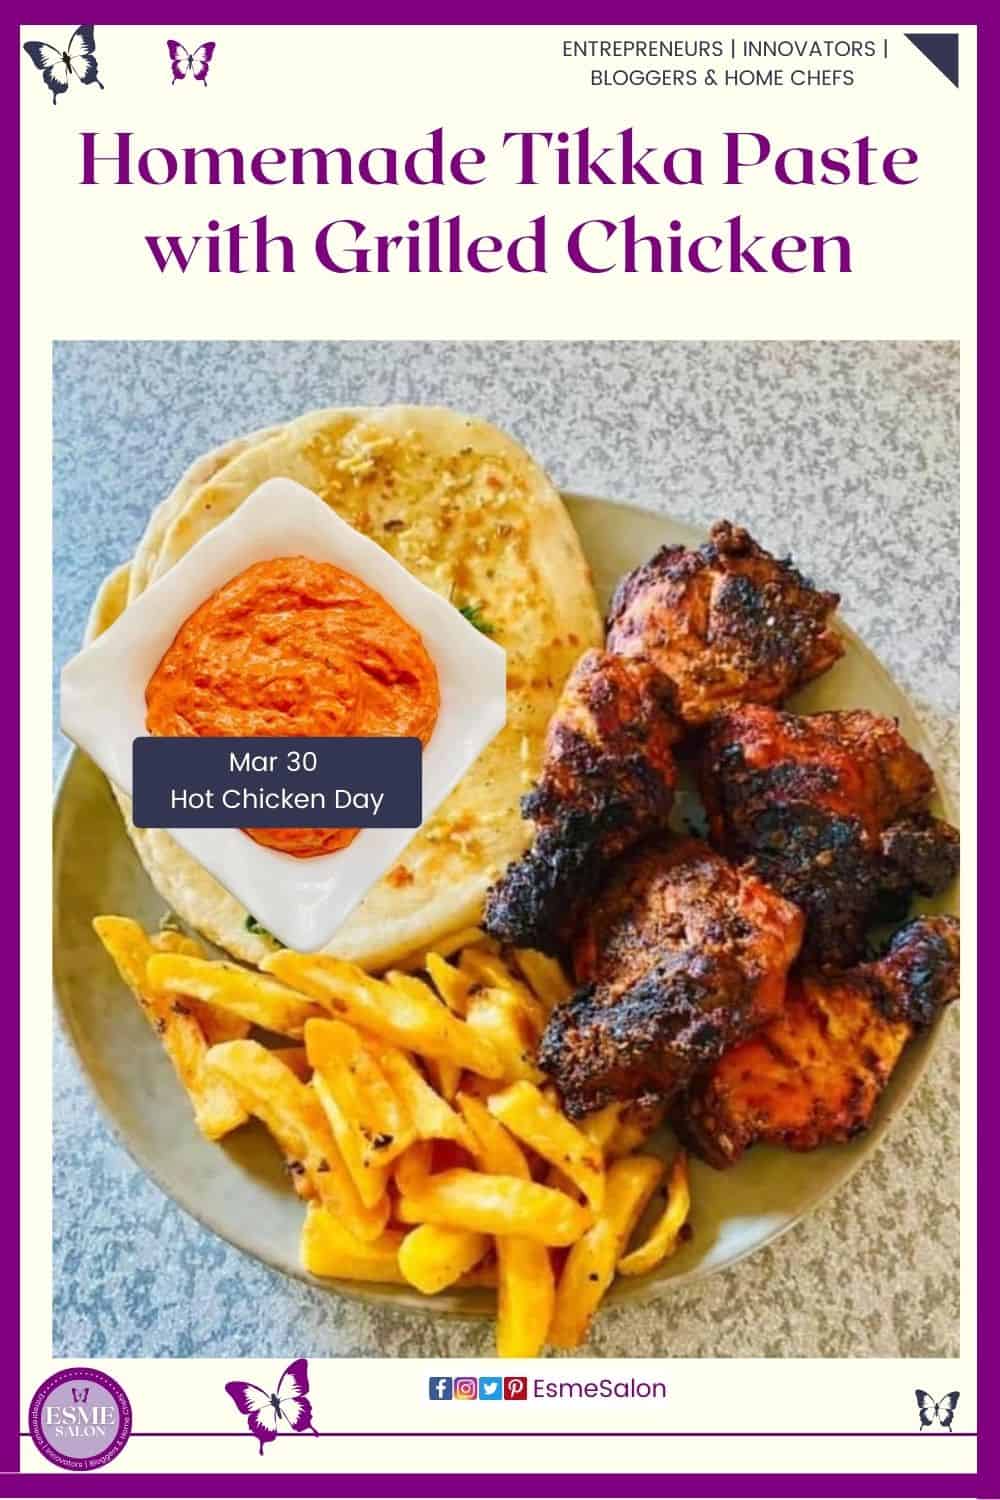 an image of a white square dish with Homemade Tikka Paste and a plate filled with Grilled Chicken lathered with Tikka Paste, and fries on the side as well as Chili Garlic Naan Bread